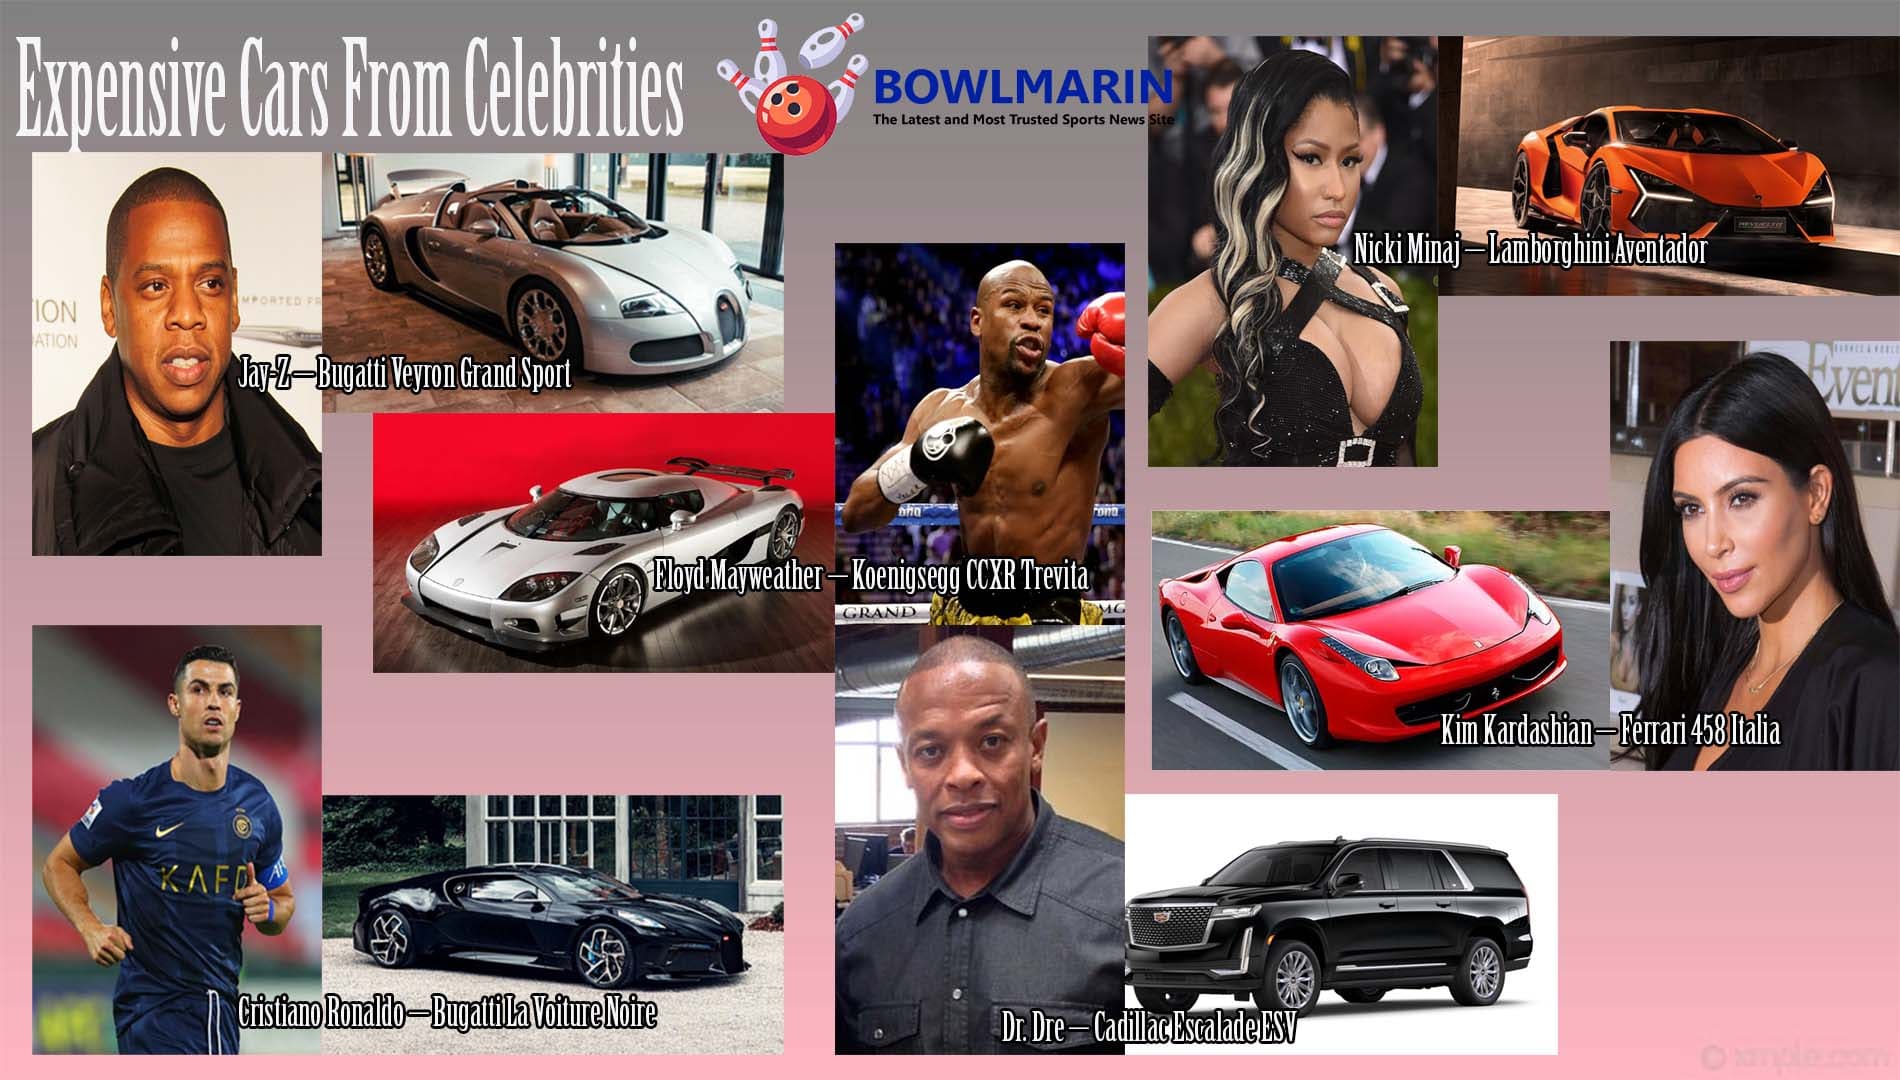 Expensive Cars From Celebrities